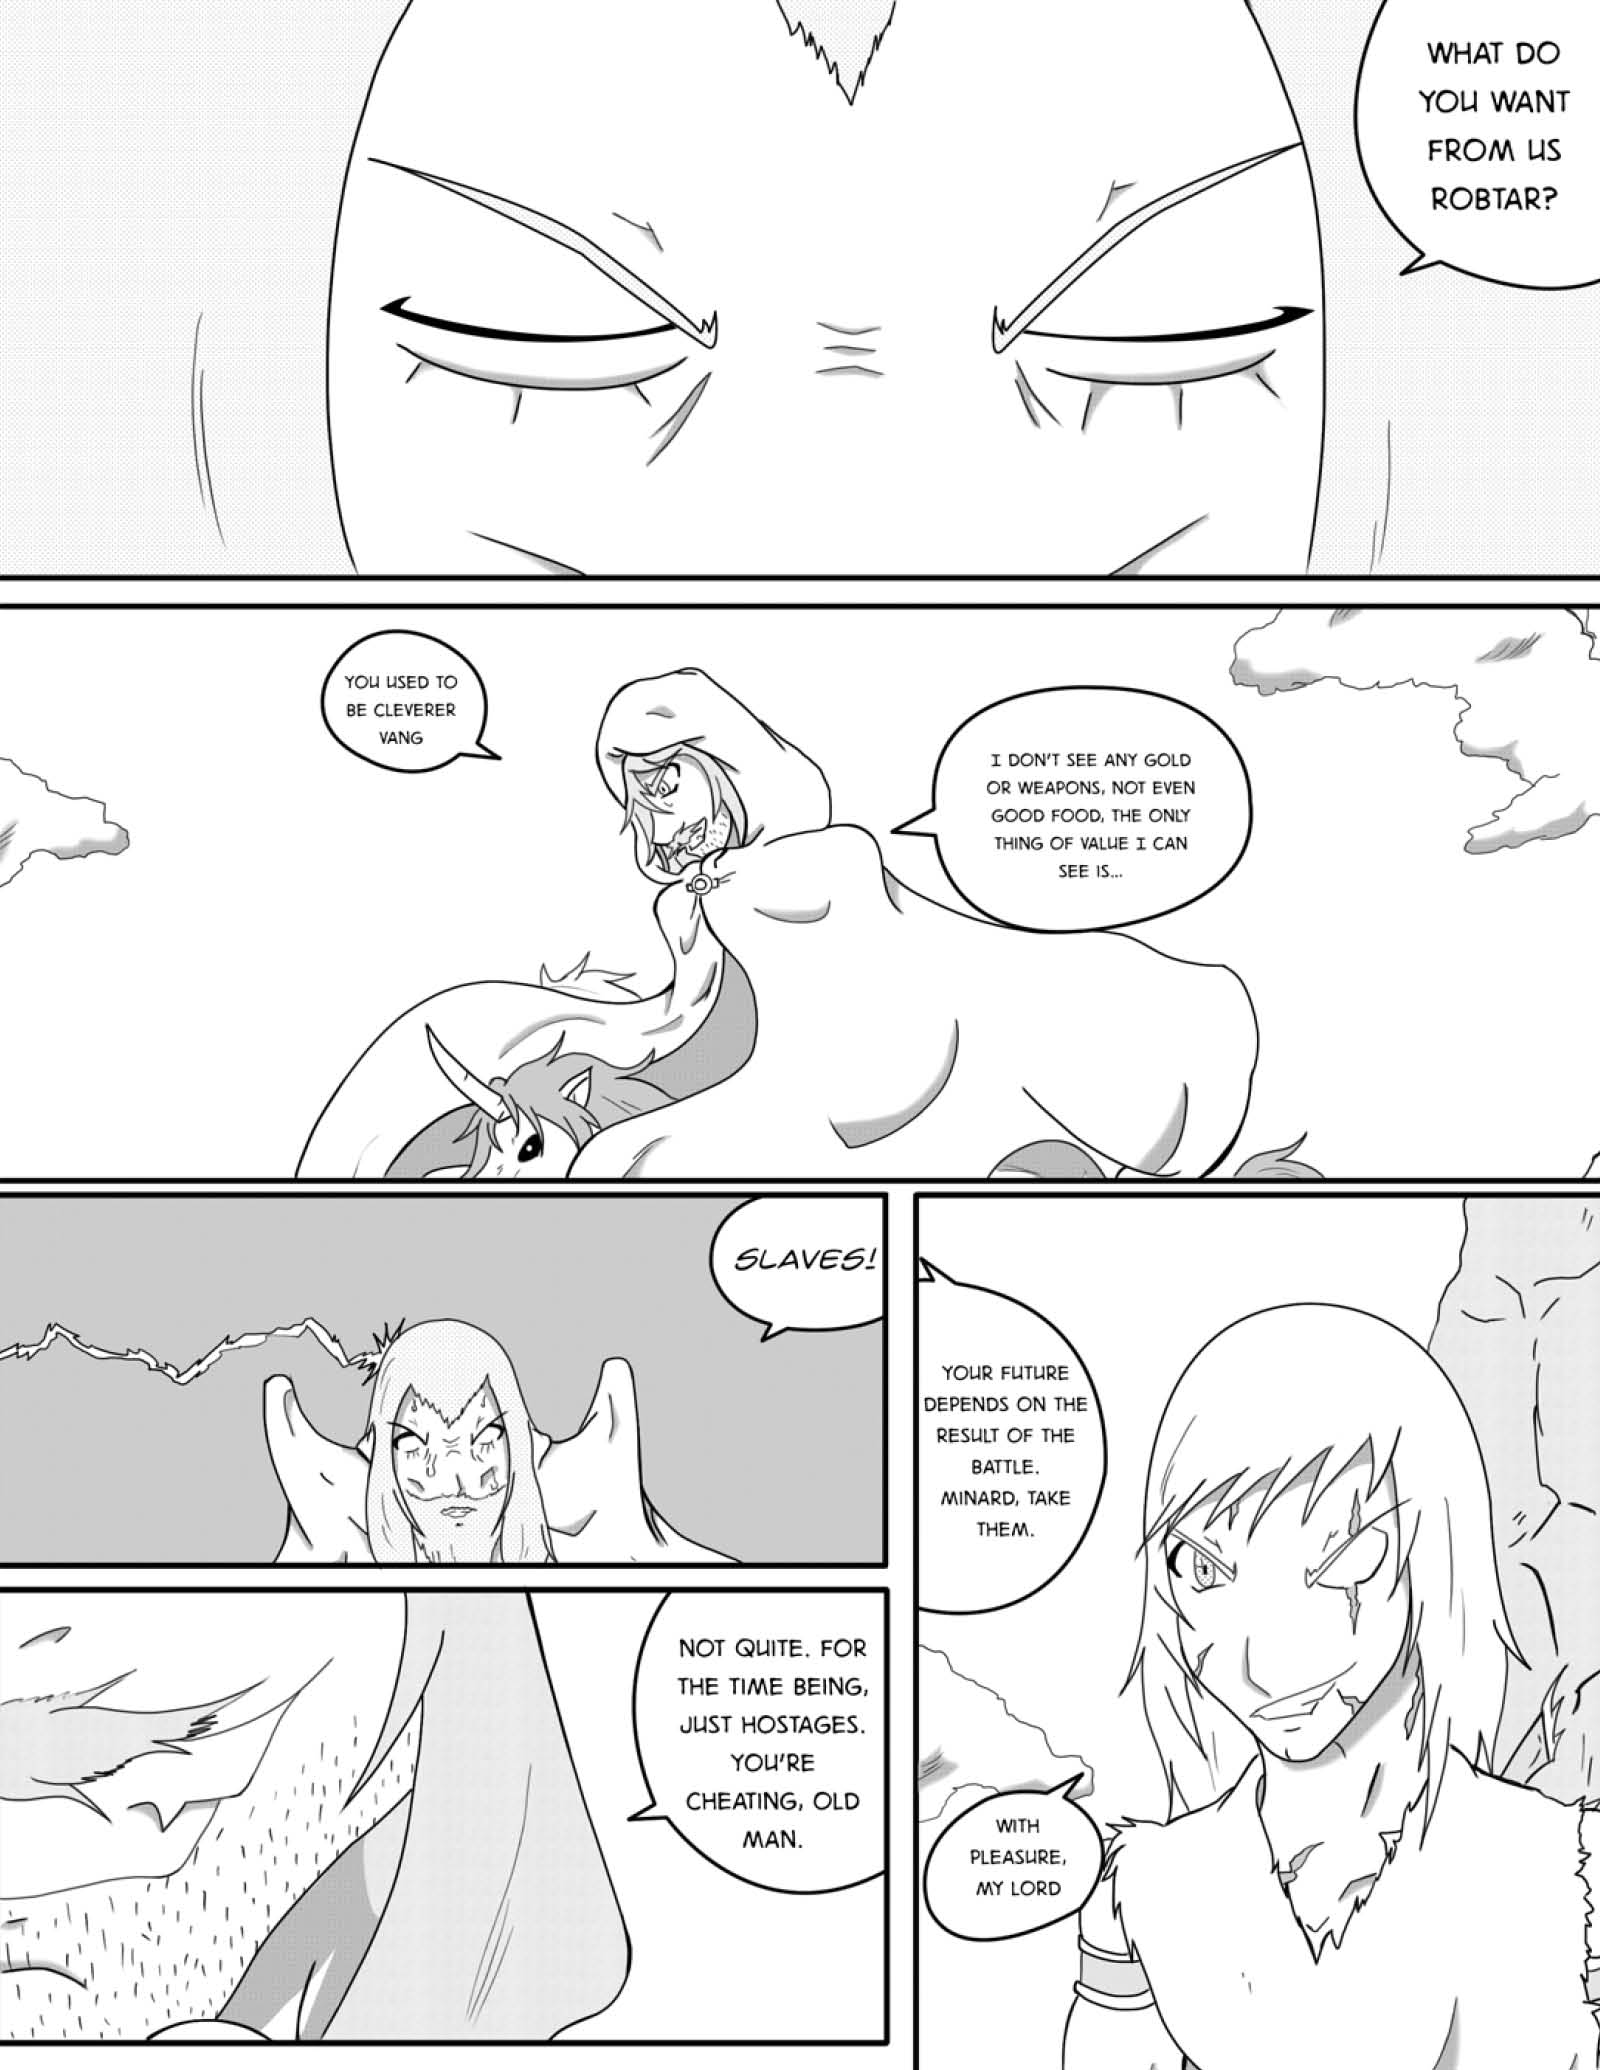 Series Dilan: the Chronicles of Covak - Chapter 3 - Page 10 - Language ENG